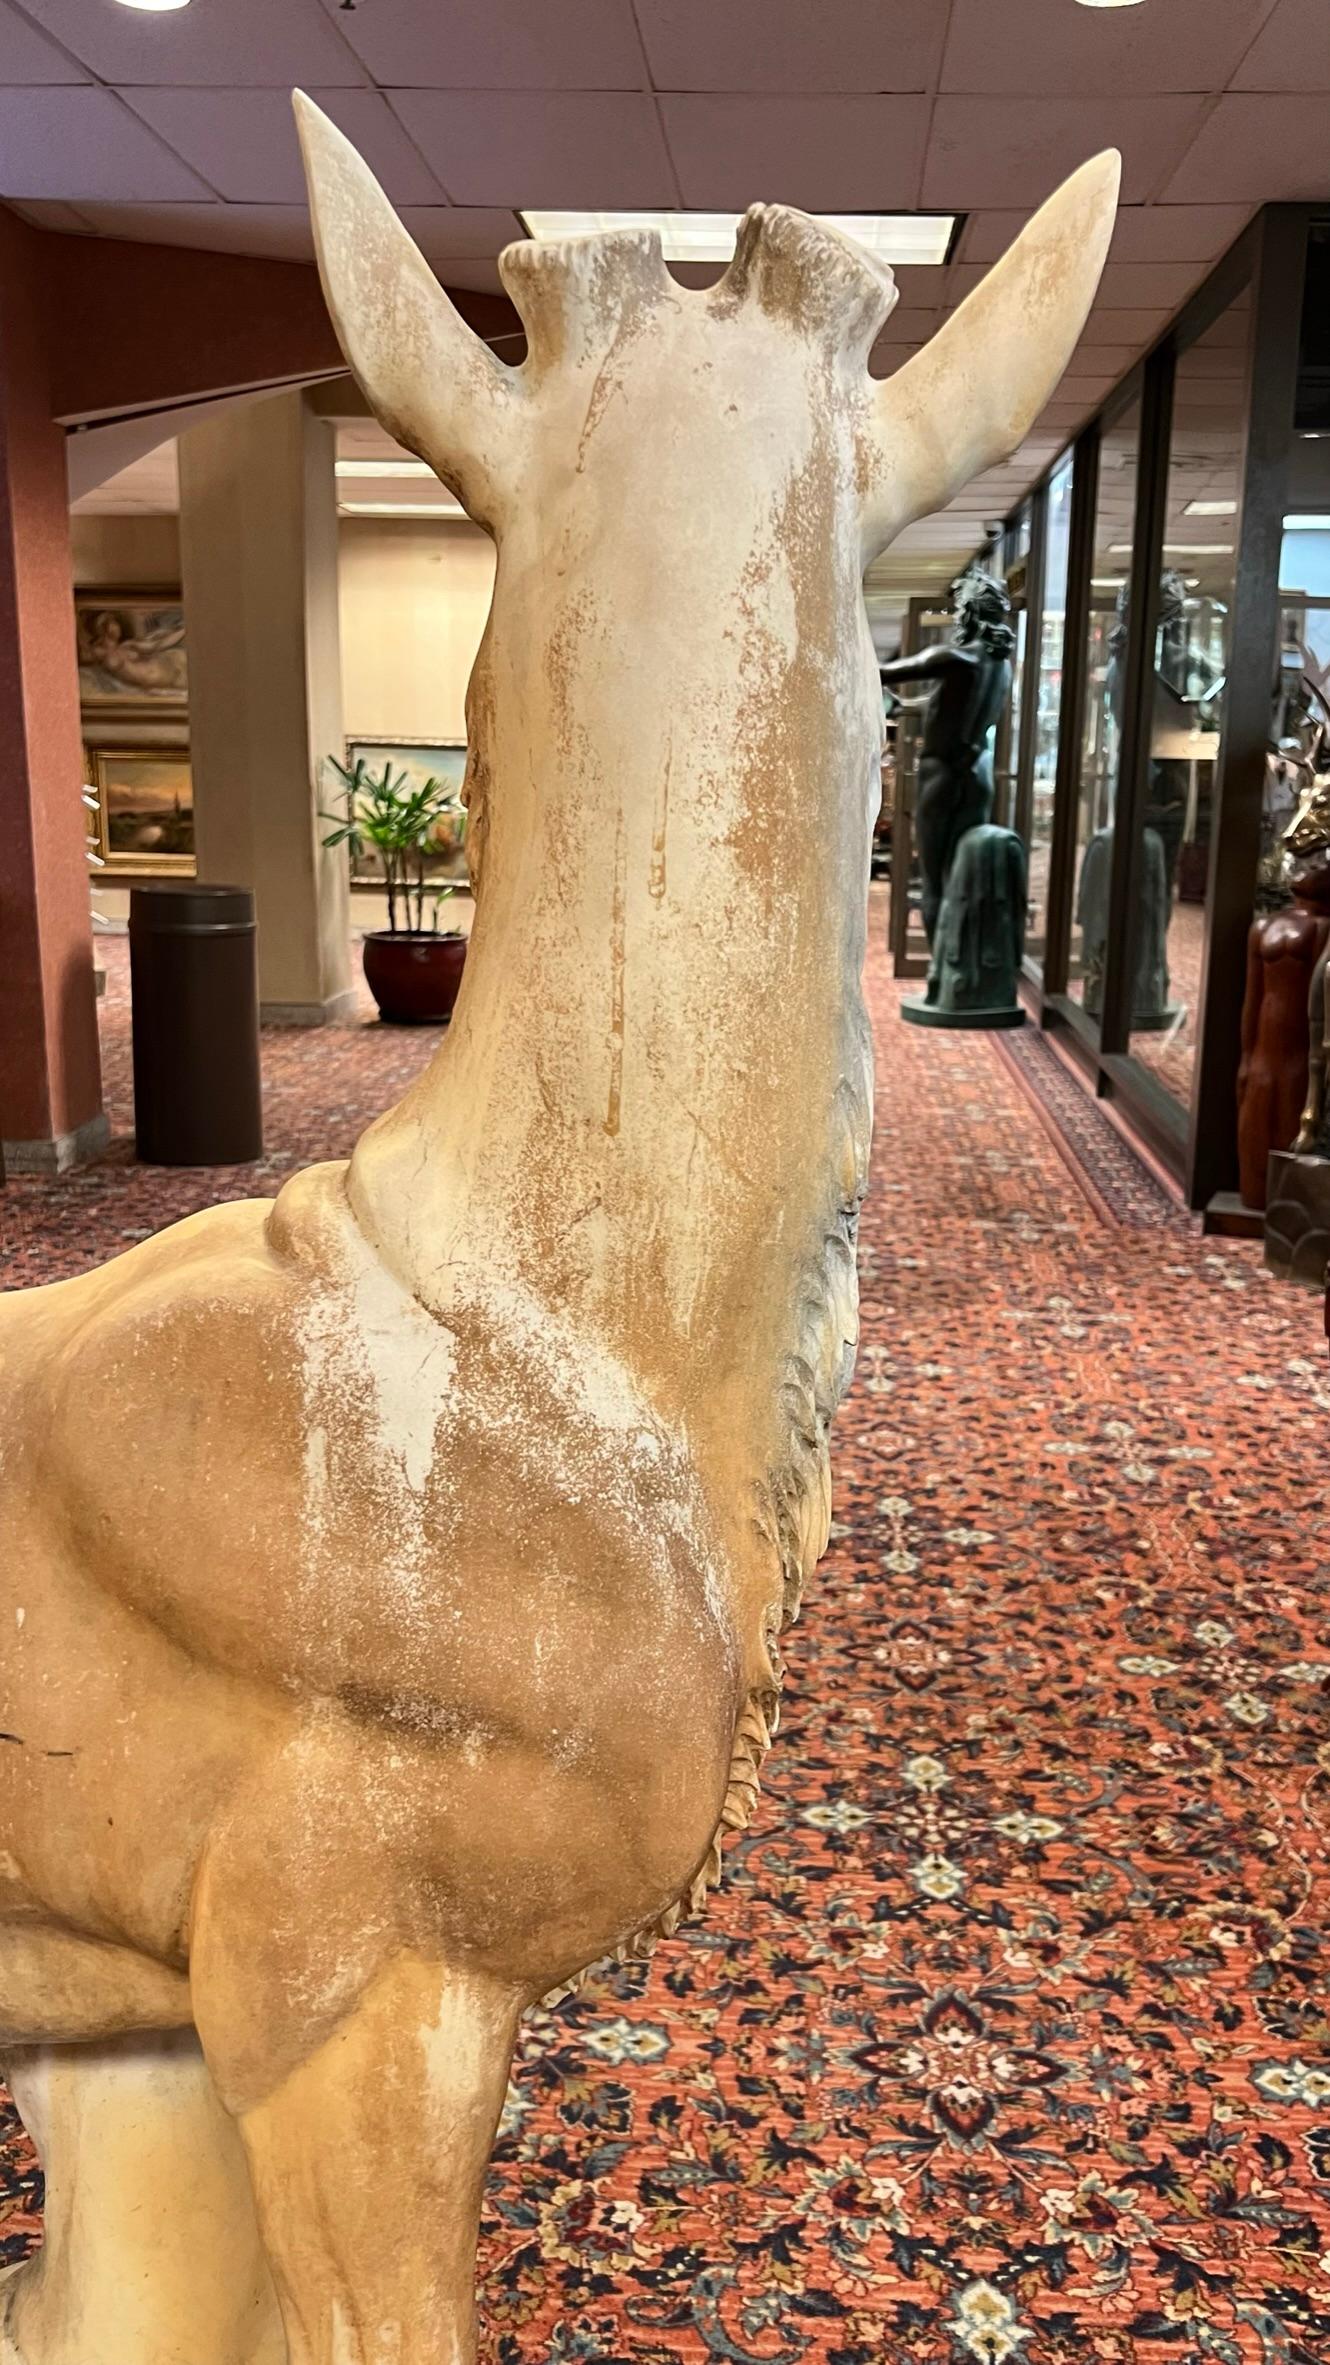 Monumental Marble Sculpture of Buck Deer and Fawn For Sale 3